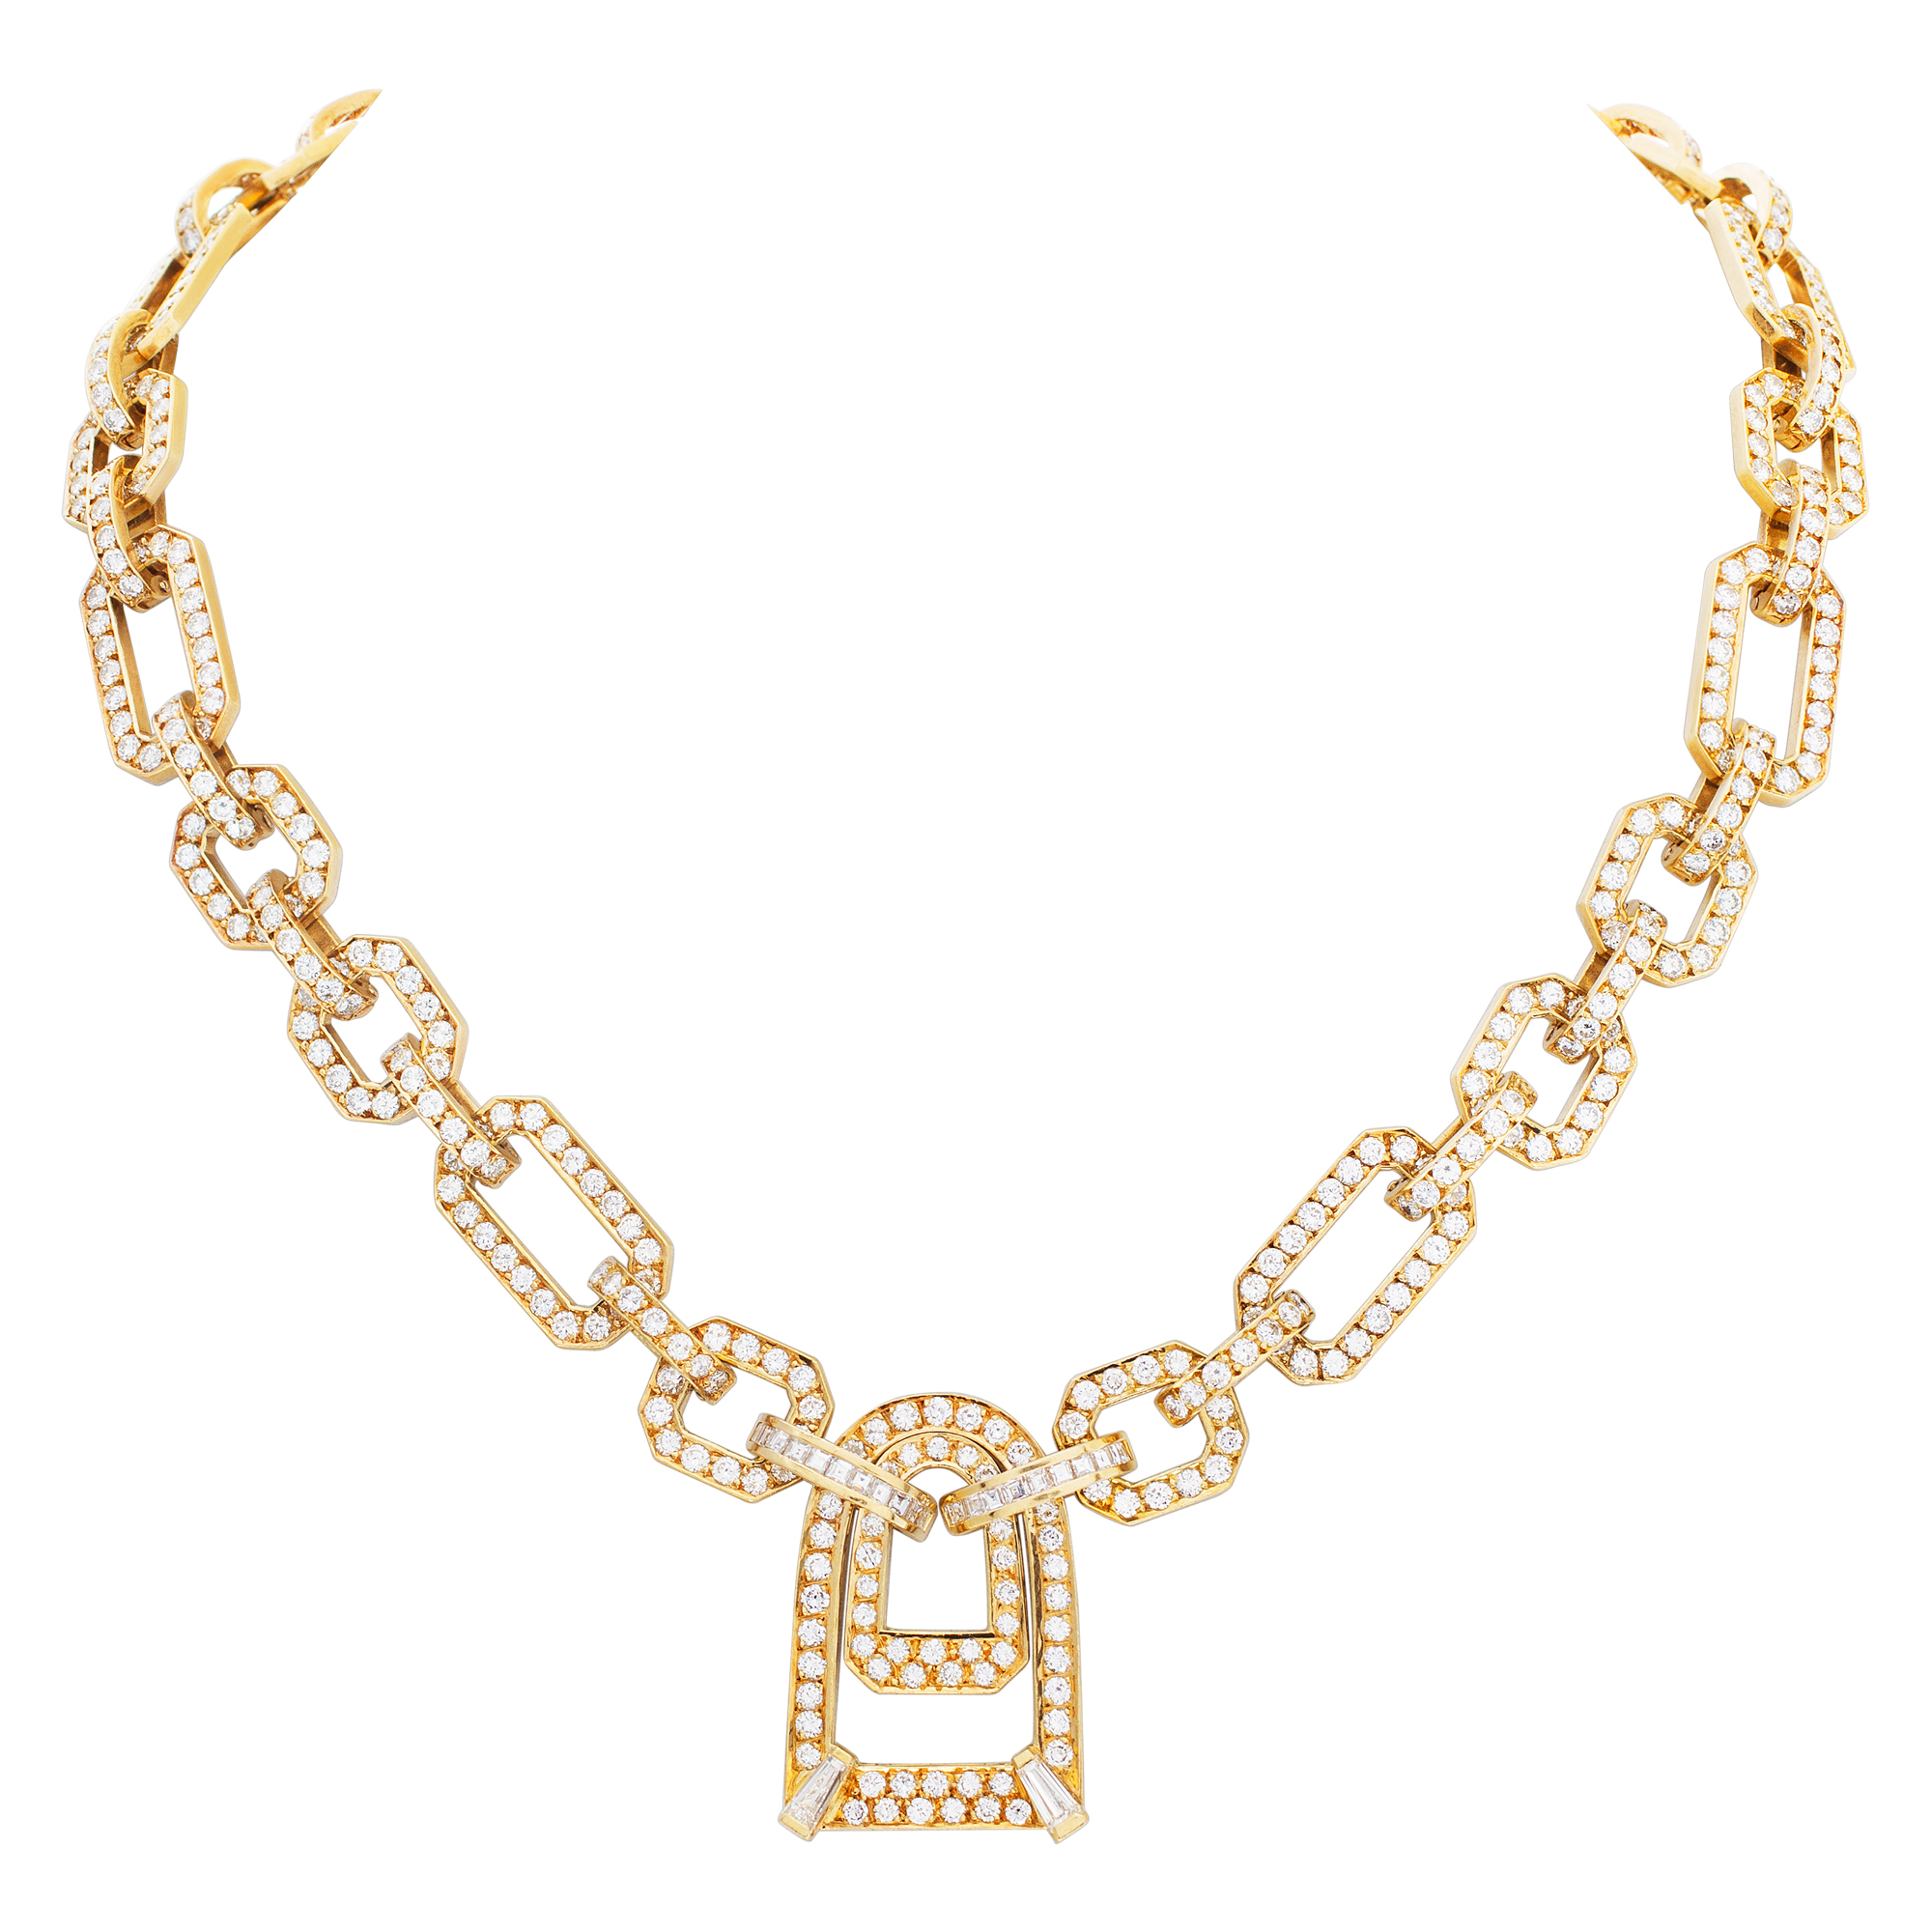 Chain link diamonds necklace set in 18K yellow gold with over 16 carats full round brilliant and baguette cut diamonds.15 inches. image 1